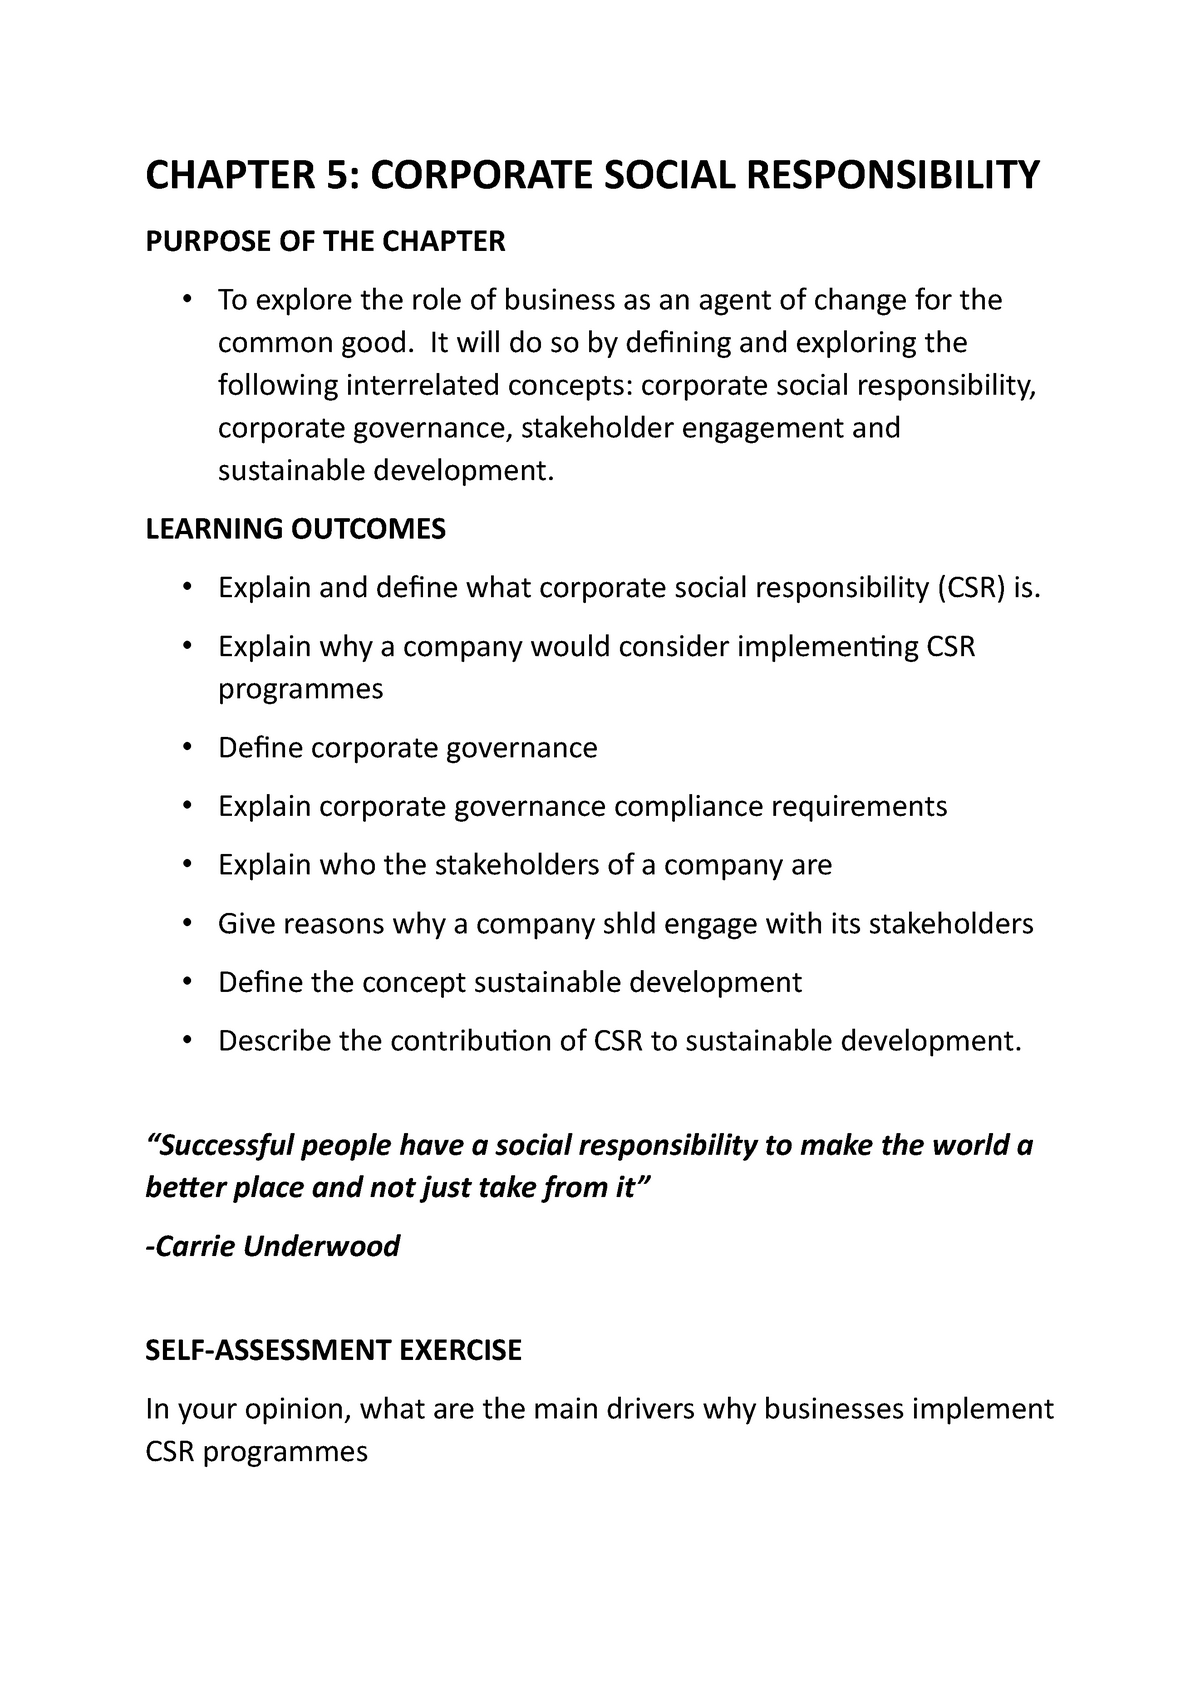 write essay on corporate social responsibility